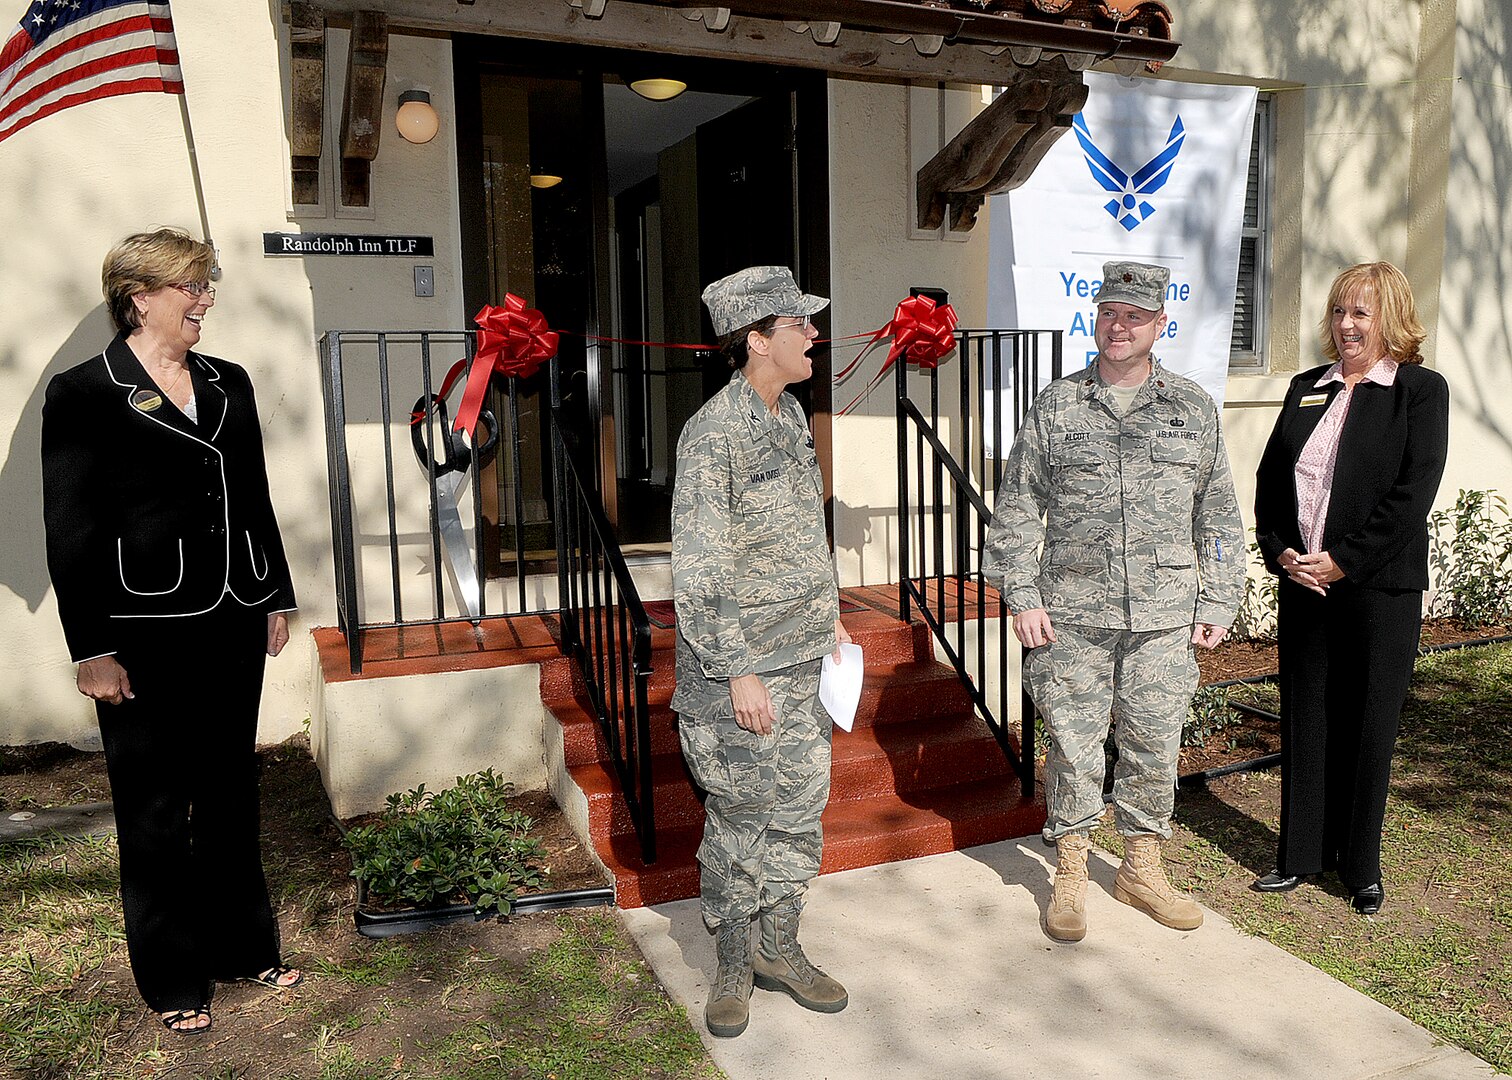 Col. Jacqueline Van Ovost, 12th Flying Training Wing commander, thanks members of Air Force Lodging and various contractors for their efforts to complete the new temporary lodging facility at Randolph Air Force Base, during a ribbon cutting ceremony on Nov. 3. In the photo from left are Mary Heagerty, 12th Force Support Squadron director, Colonel Van Ovost, Maj. Todd Alcott, Air Force Lodging chief, and Mary Eddy, 12th FSS lodging manager. (U.S. Air Force photo by David Terry)